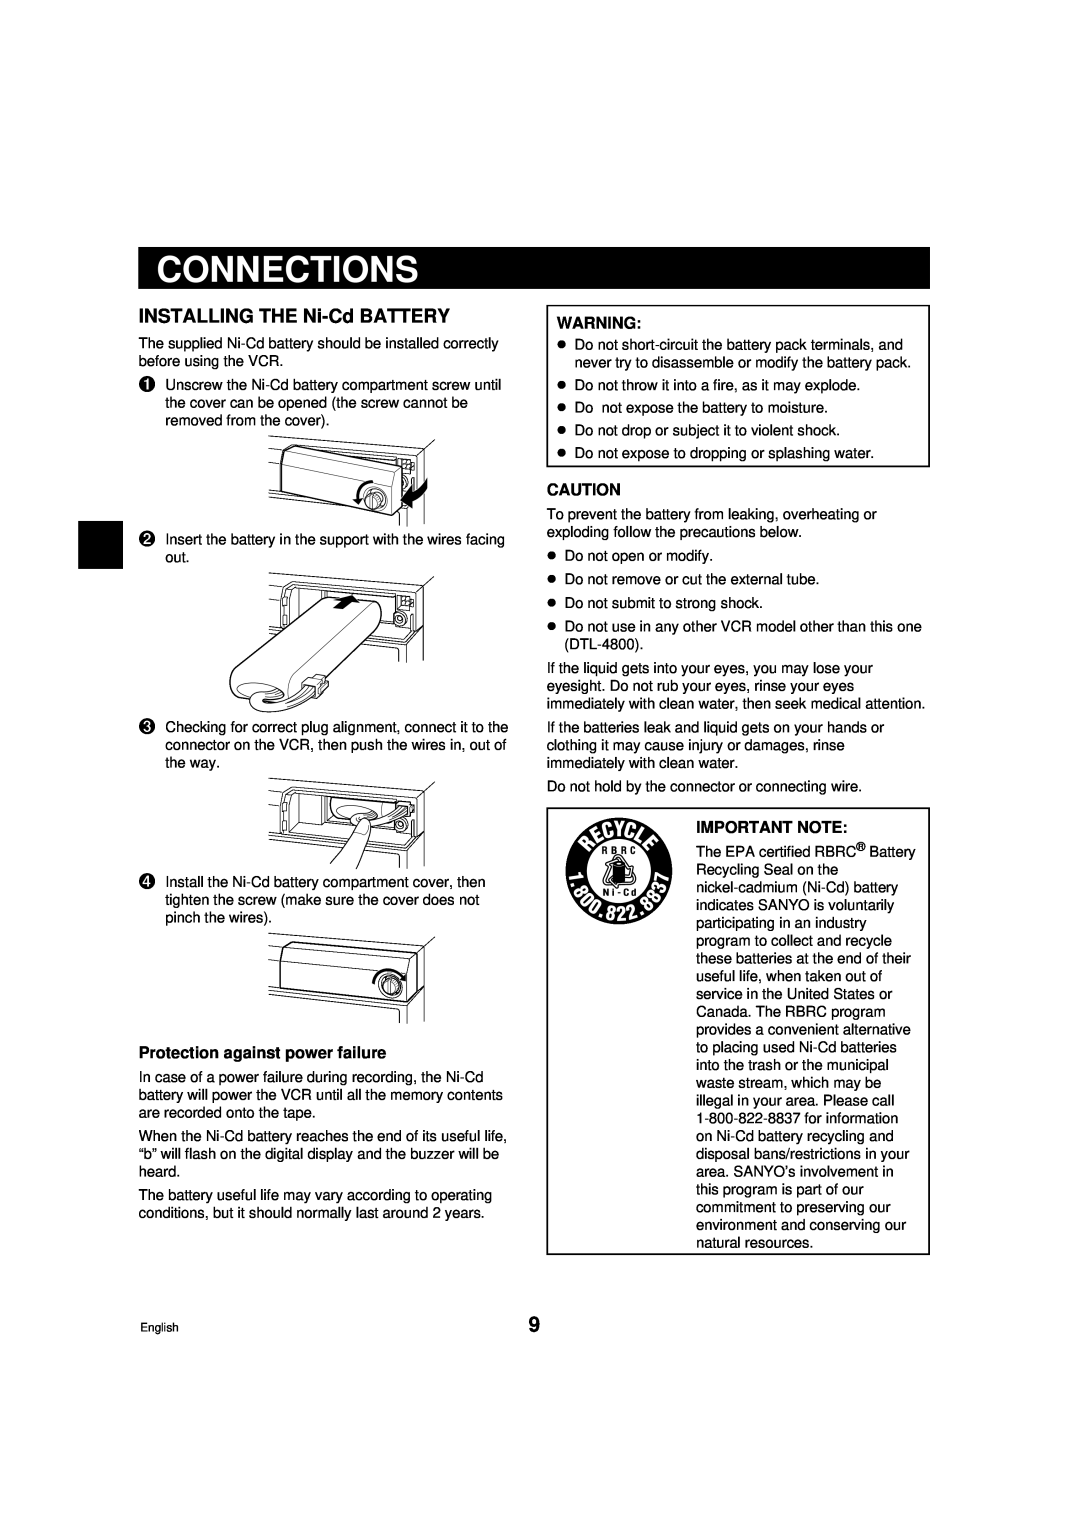 Sanyo DTL-4800, RD2QD/NA Connections, INSTALLING THE Ni-Cd BATTERY, Protection against power failure, Important Note 